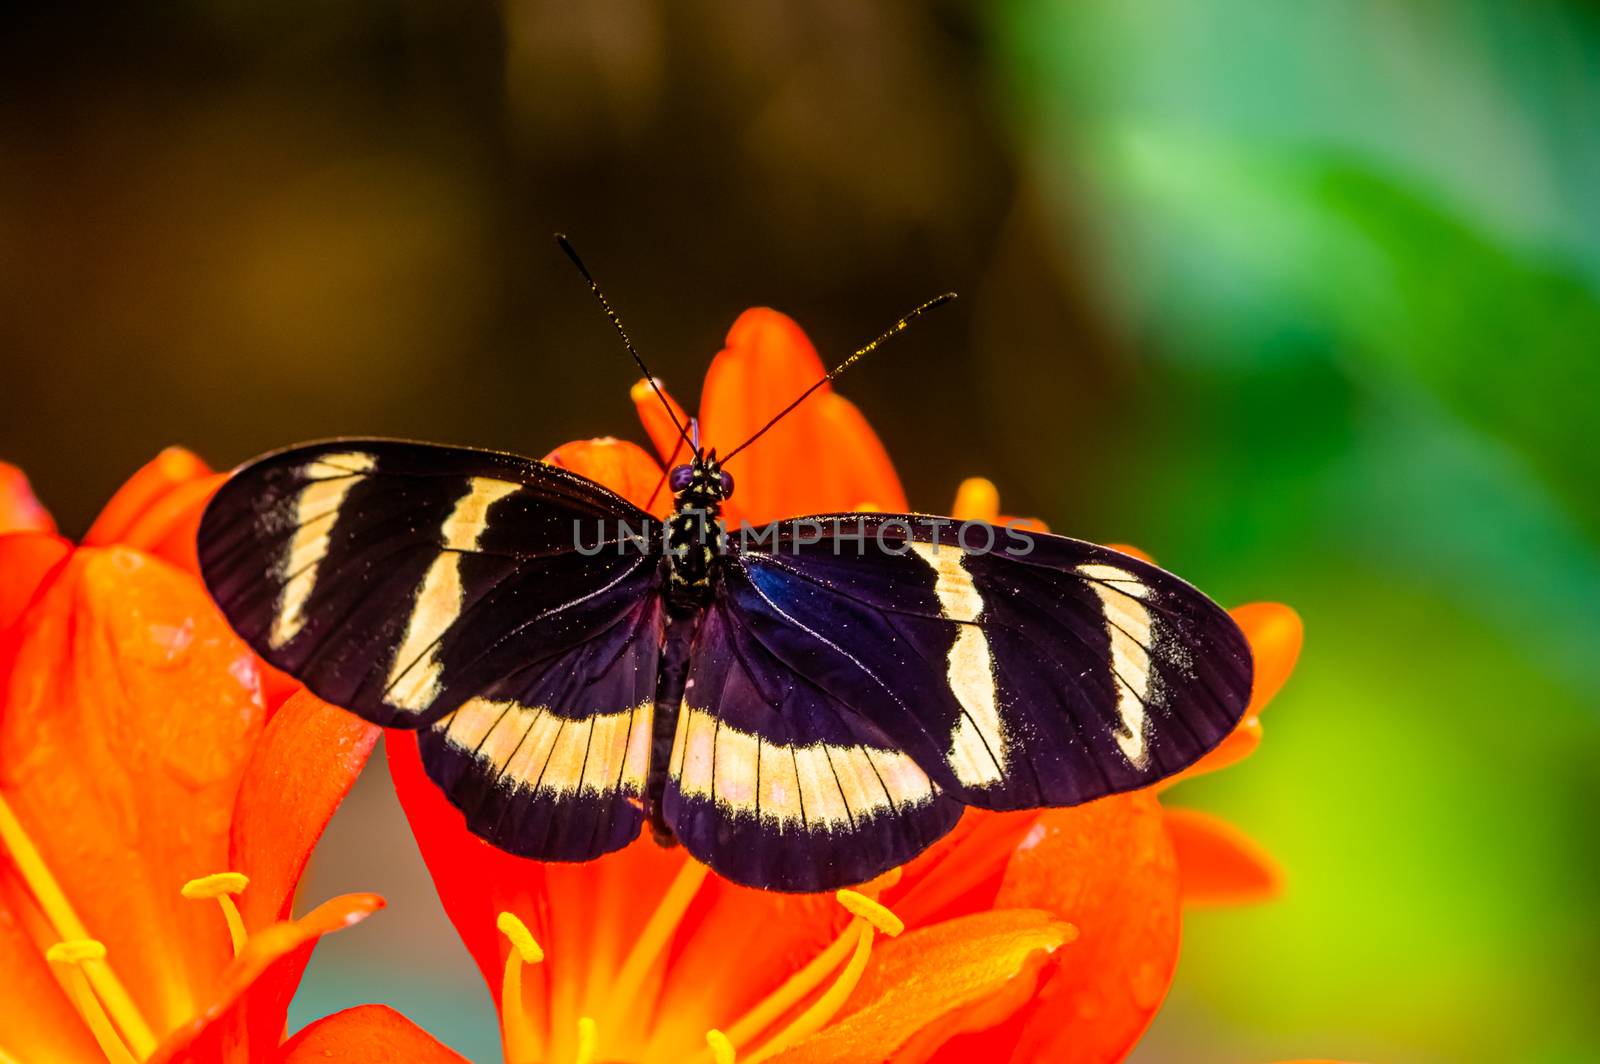 hewitson's longwing butterfly in macro closeup, tropical insect specie from Costa Rica, America by charlottebleijenberg